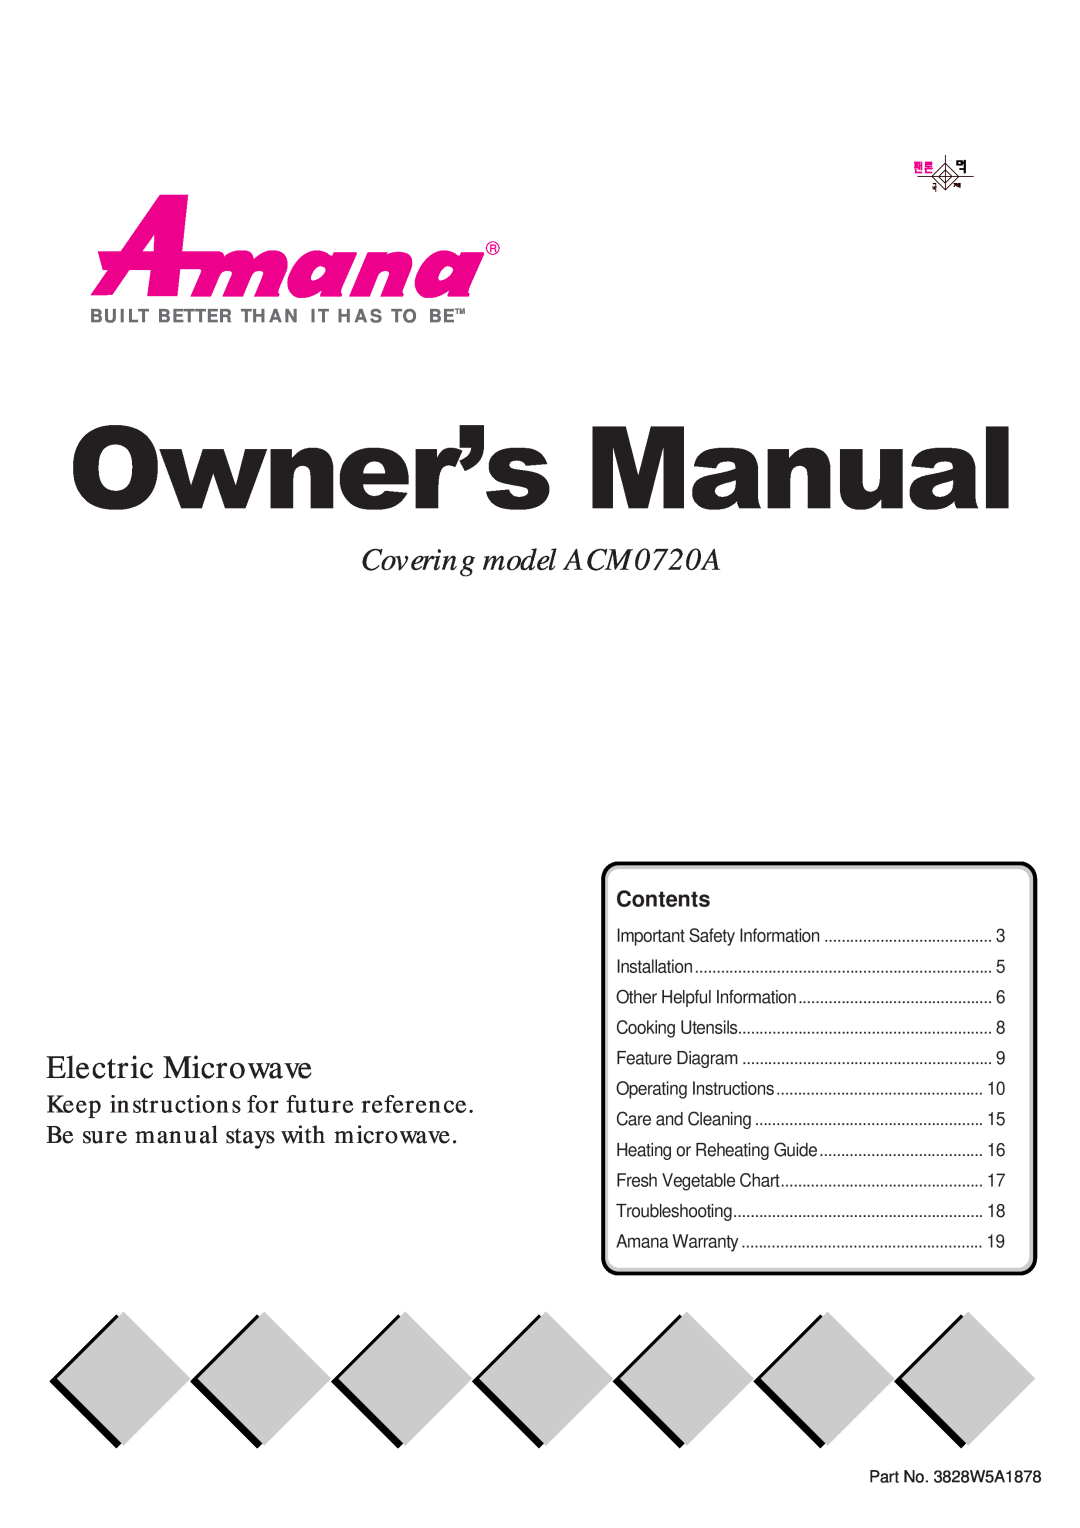 Amana warranty Covering model ACM0720A, Electric Microwave, OwnerÕs Manual, Contents, Built Better Than It Has To Be 